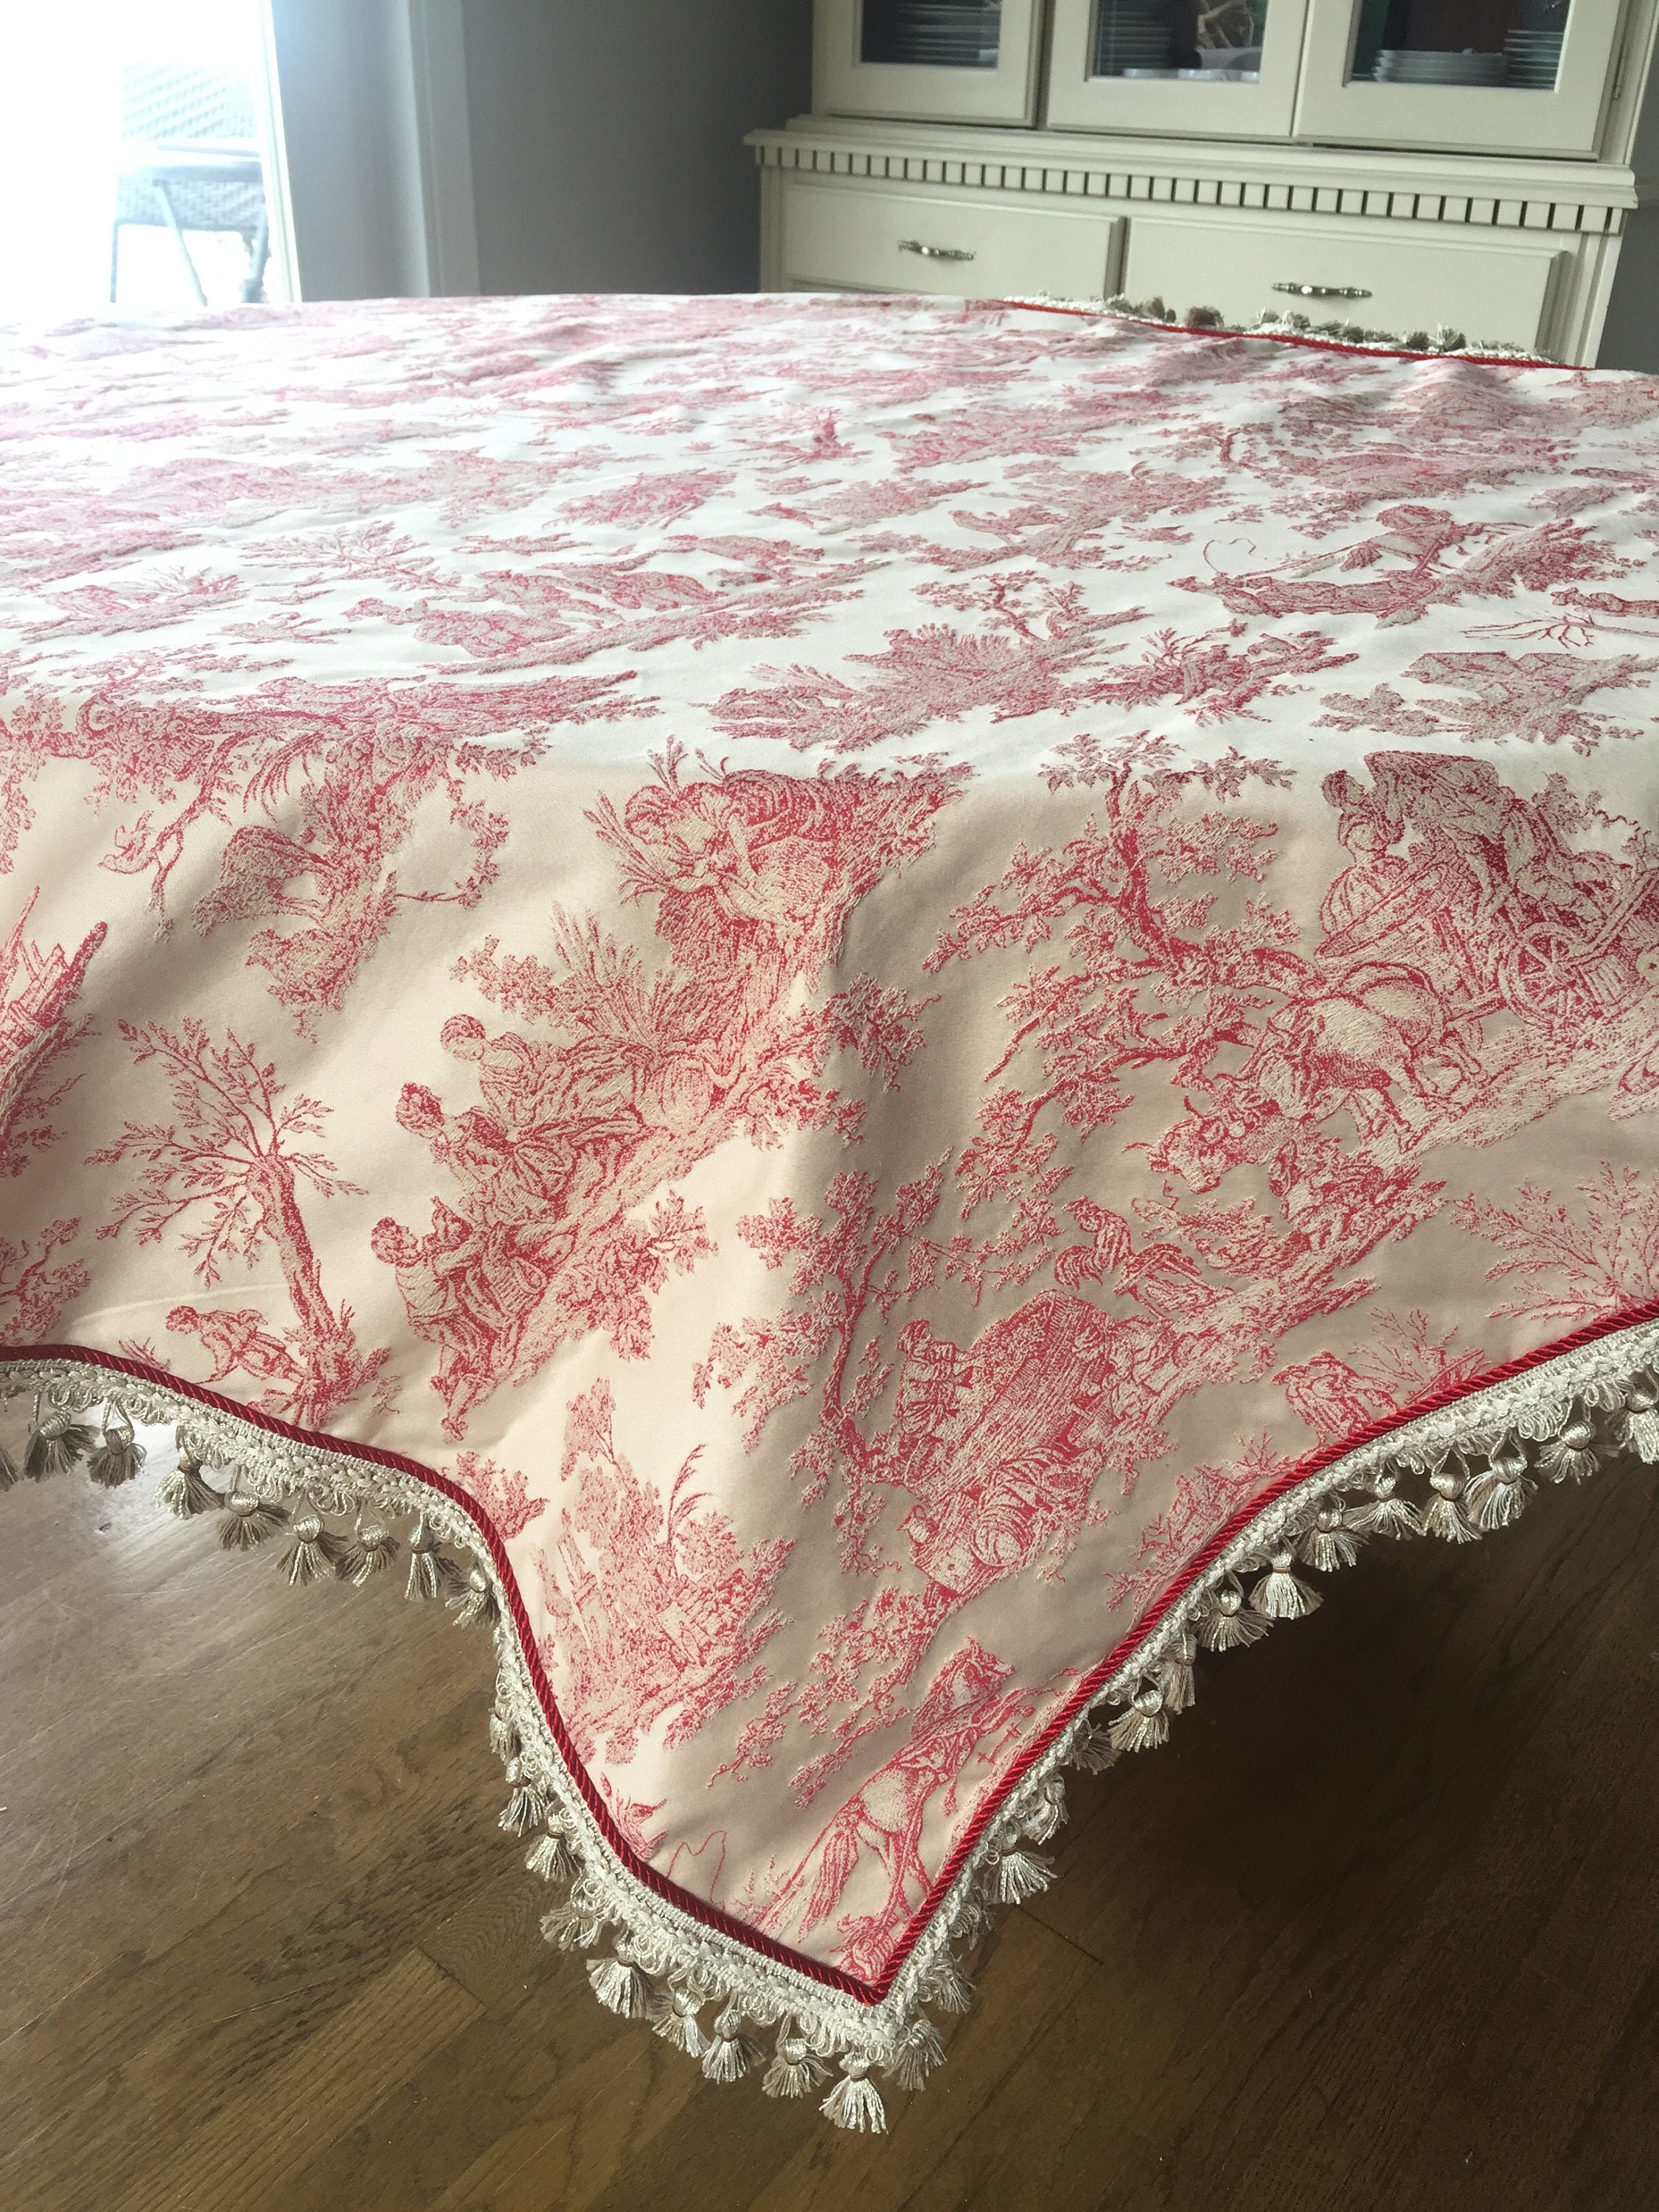 Red Toile Tablecloth - Etsy